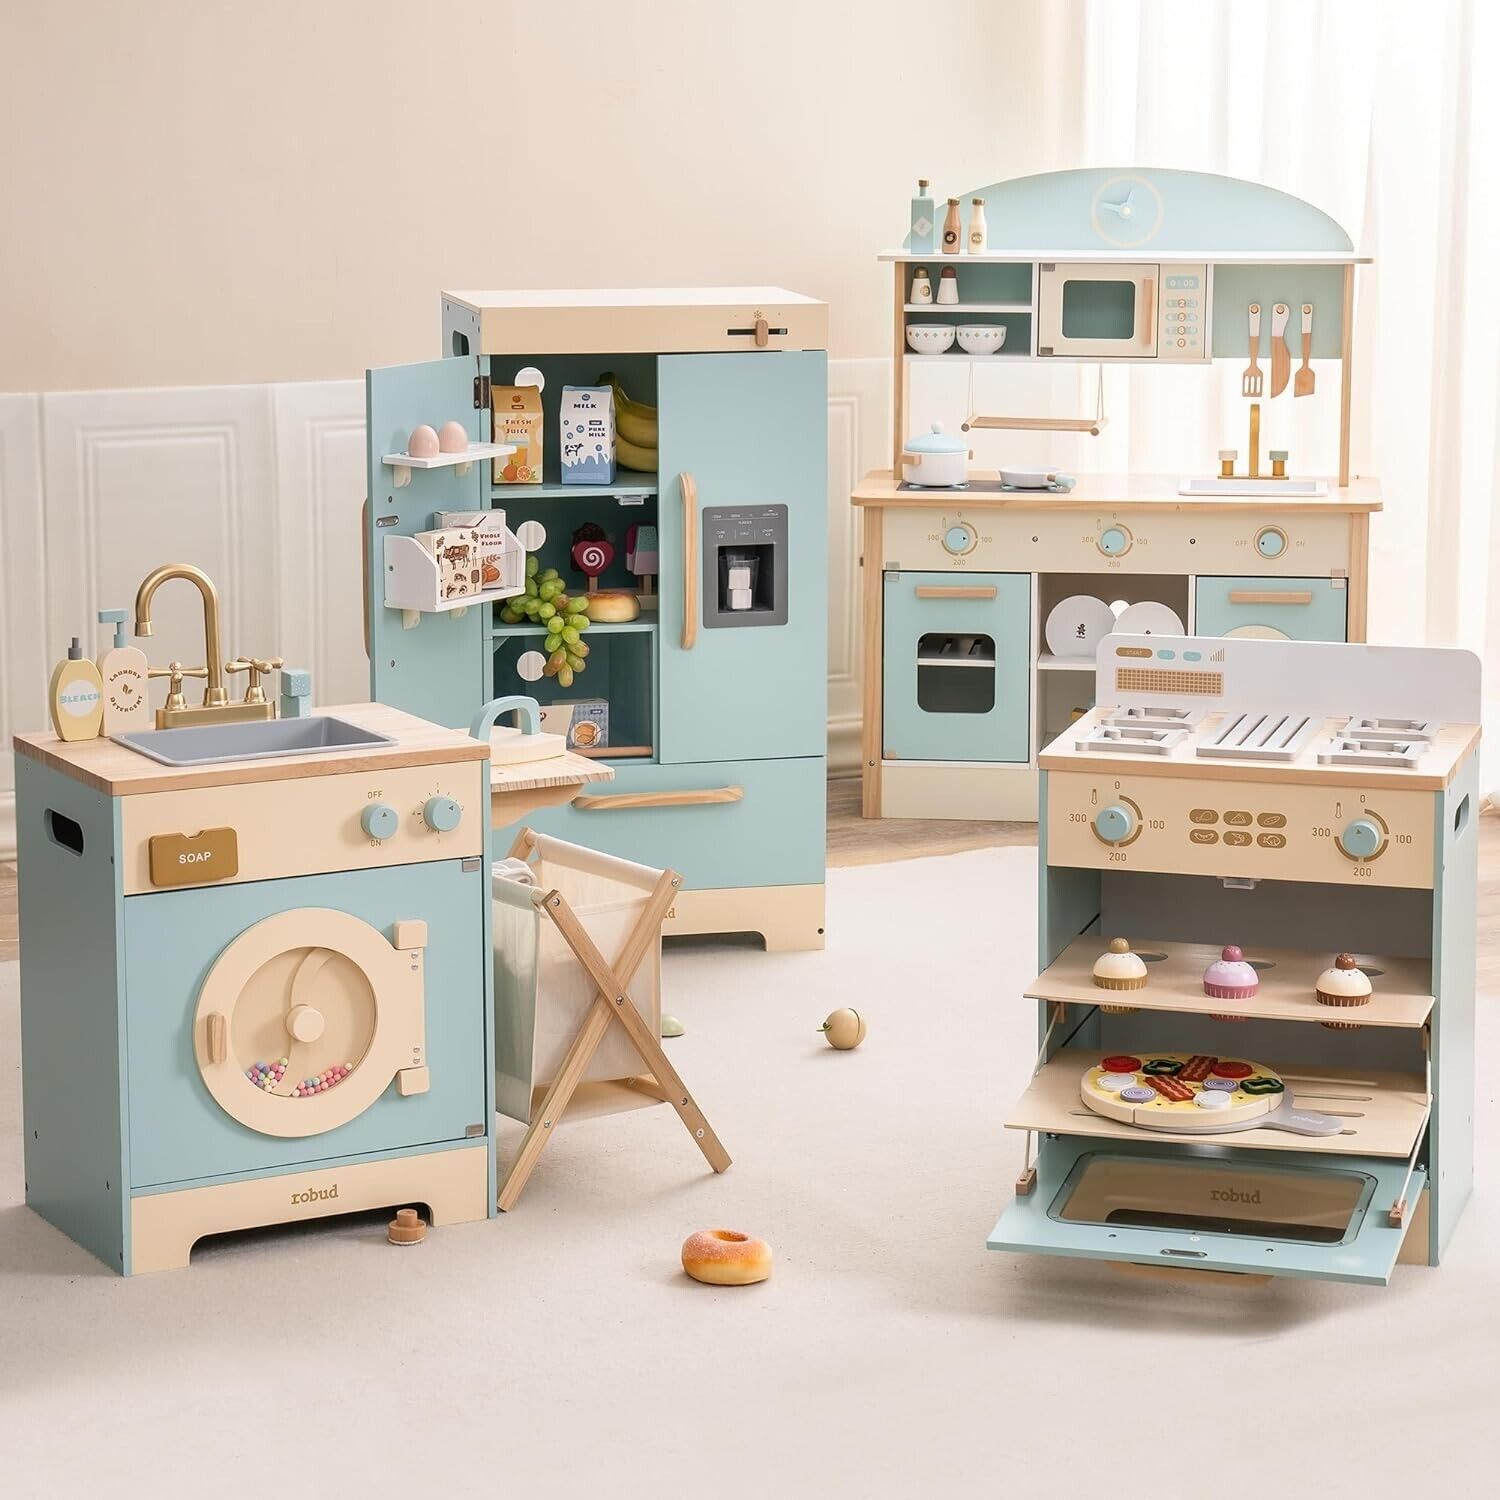 Robotime Kids Corner Kitchen Playset Wooden Play Toy w/ Oven & Fridge for Toddle